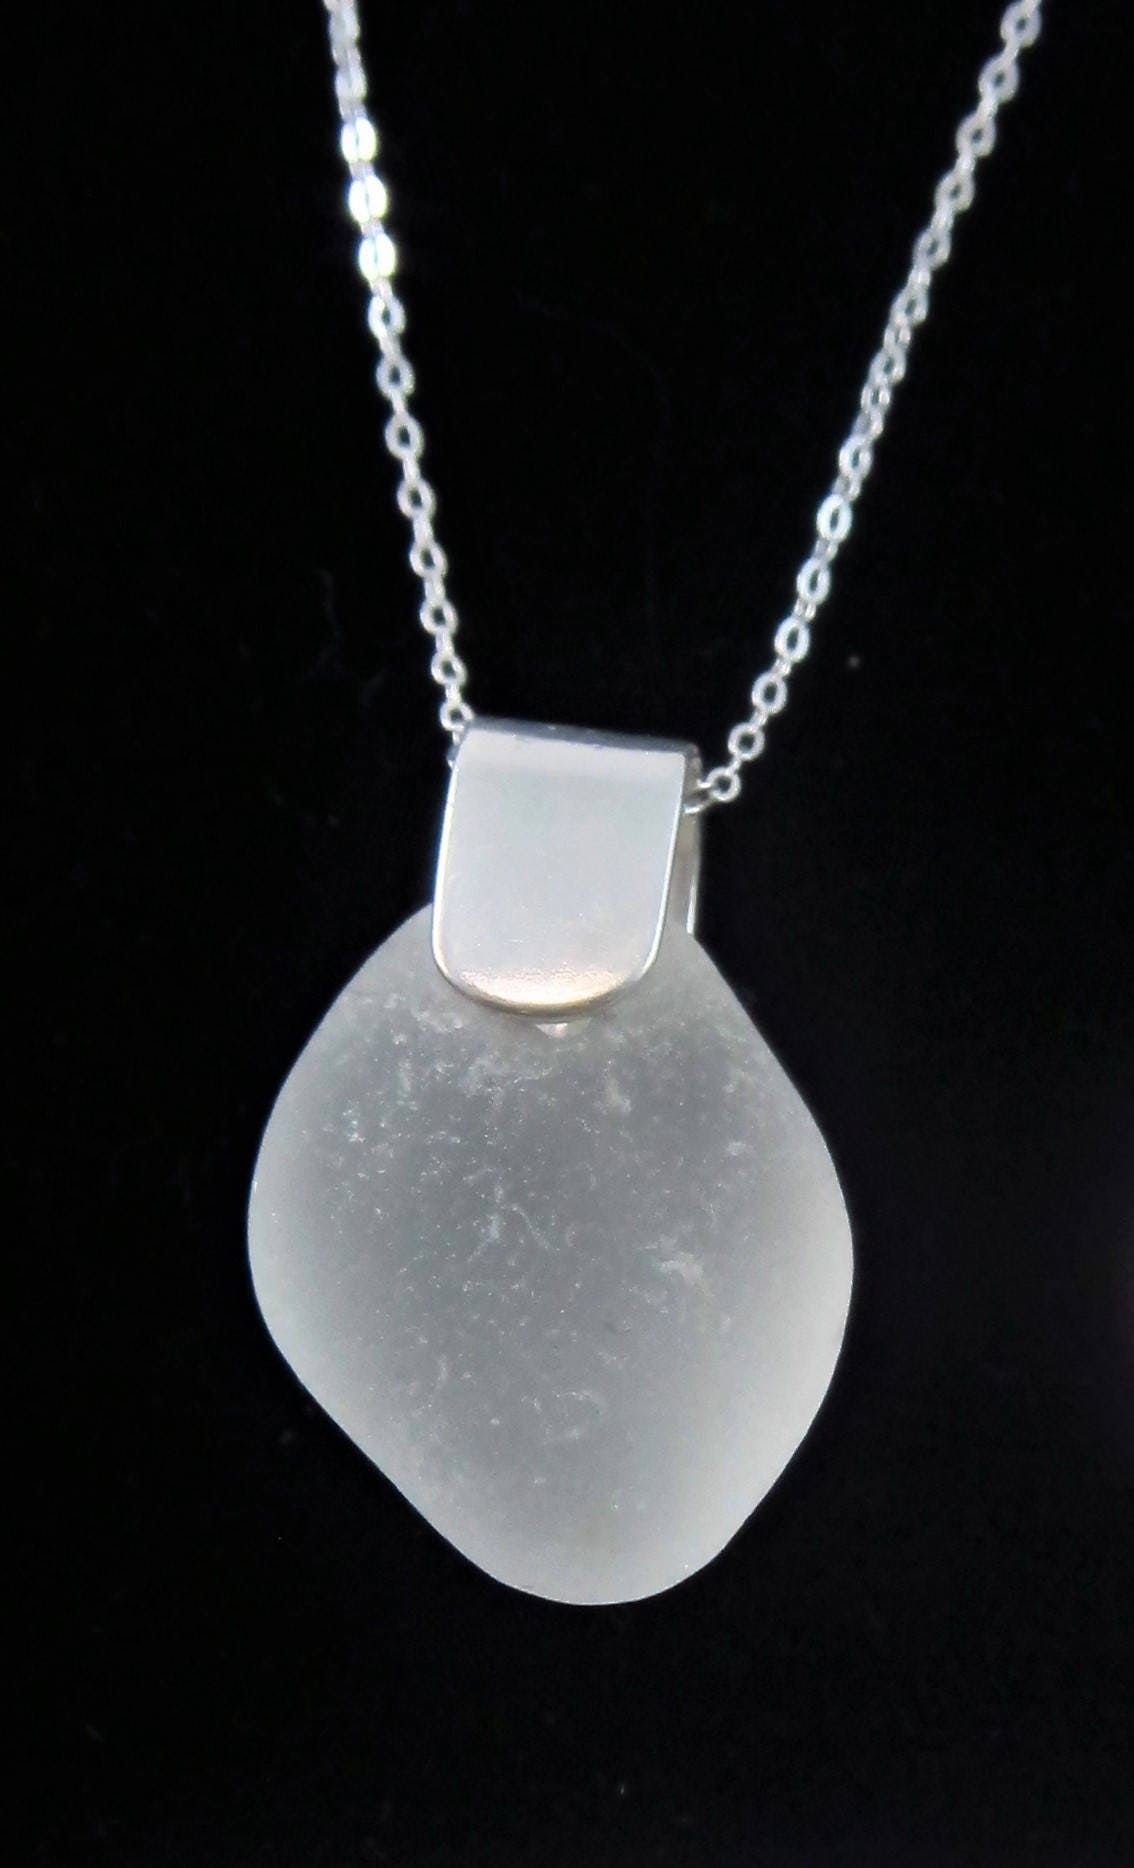 Shoreline Pendant - White frosted sea glass from Sydney, Cape Breton, Nova Scotia, Canada with wide modern Sterling silver bail with chain